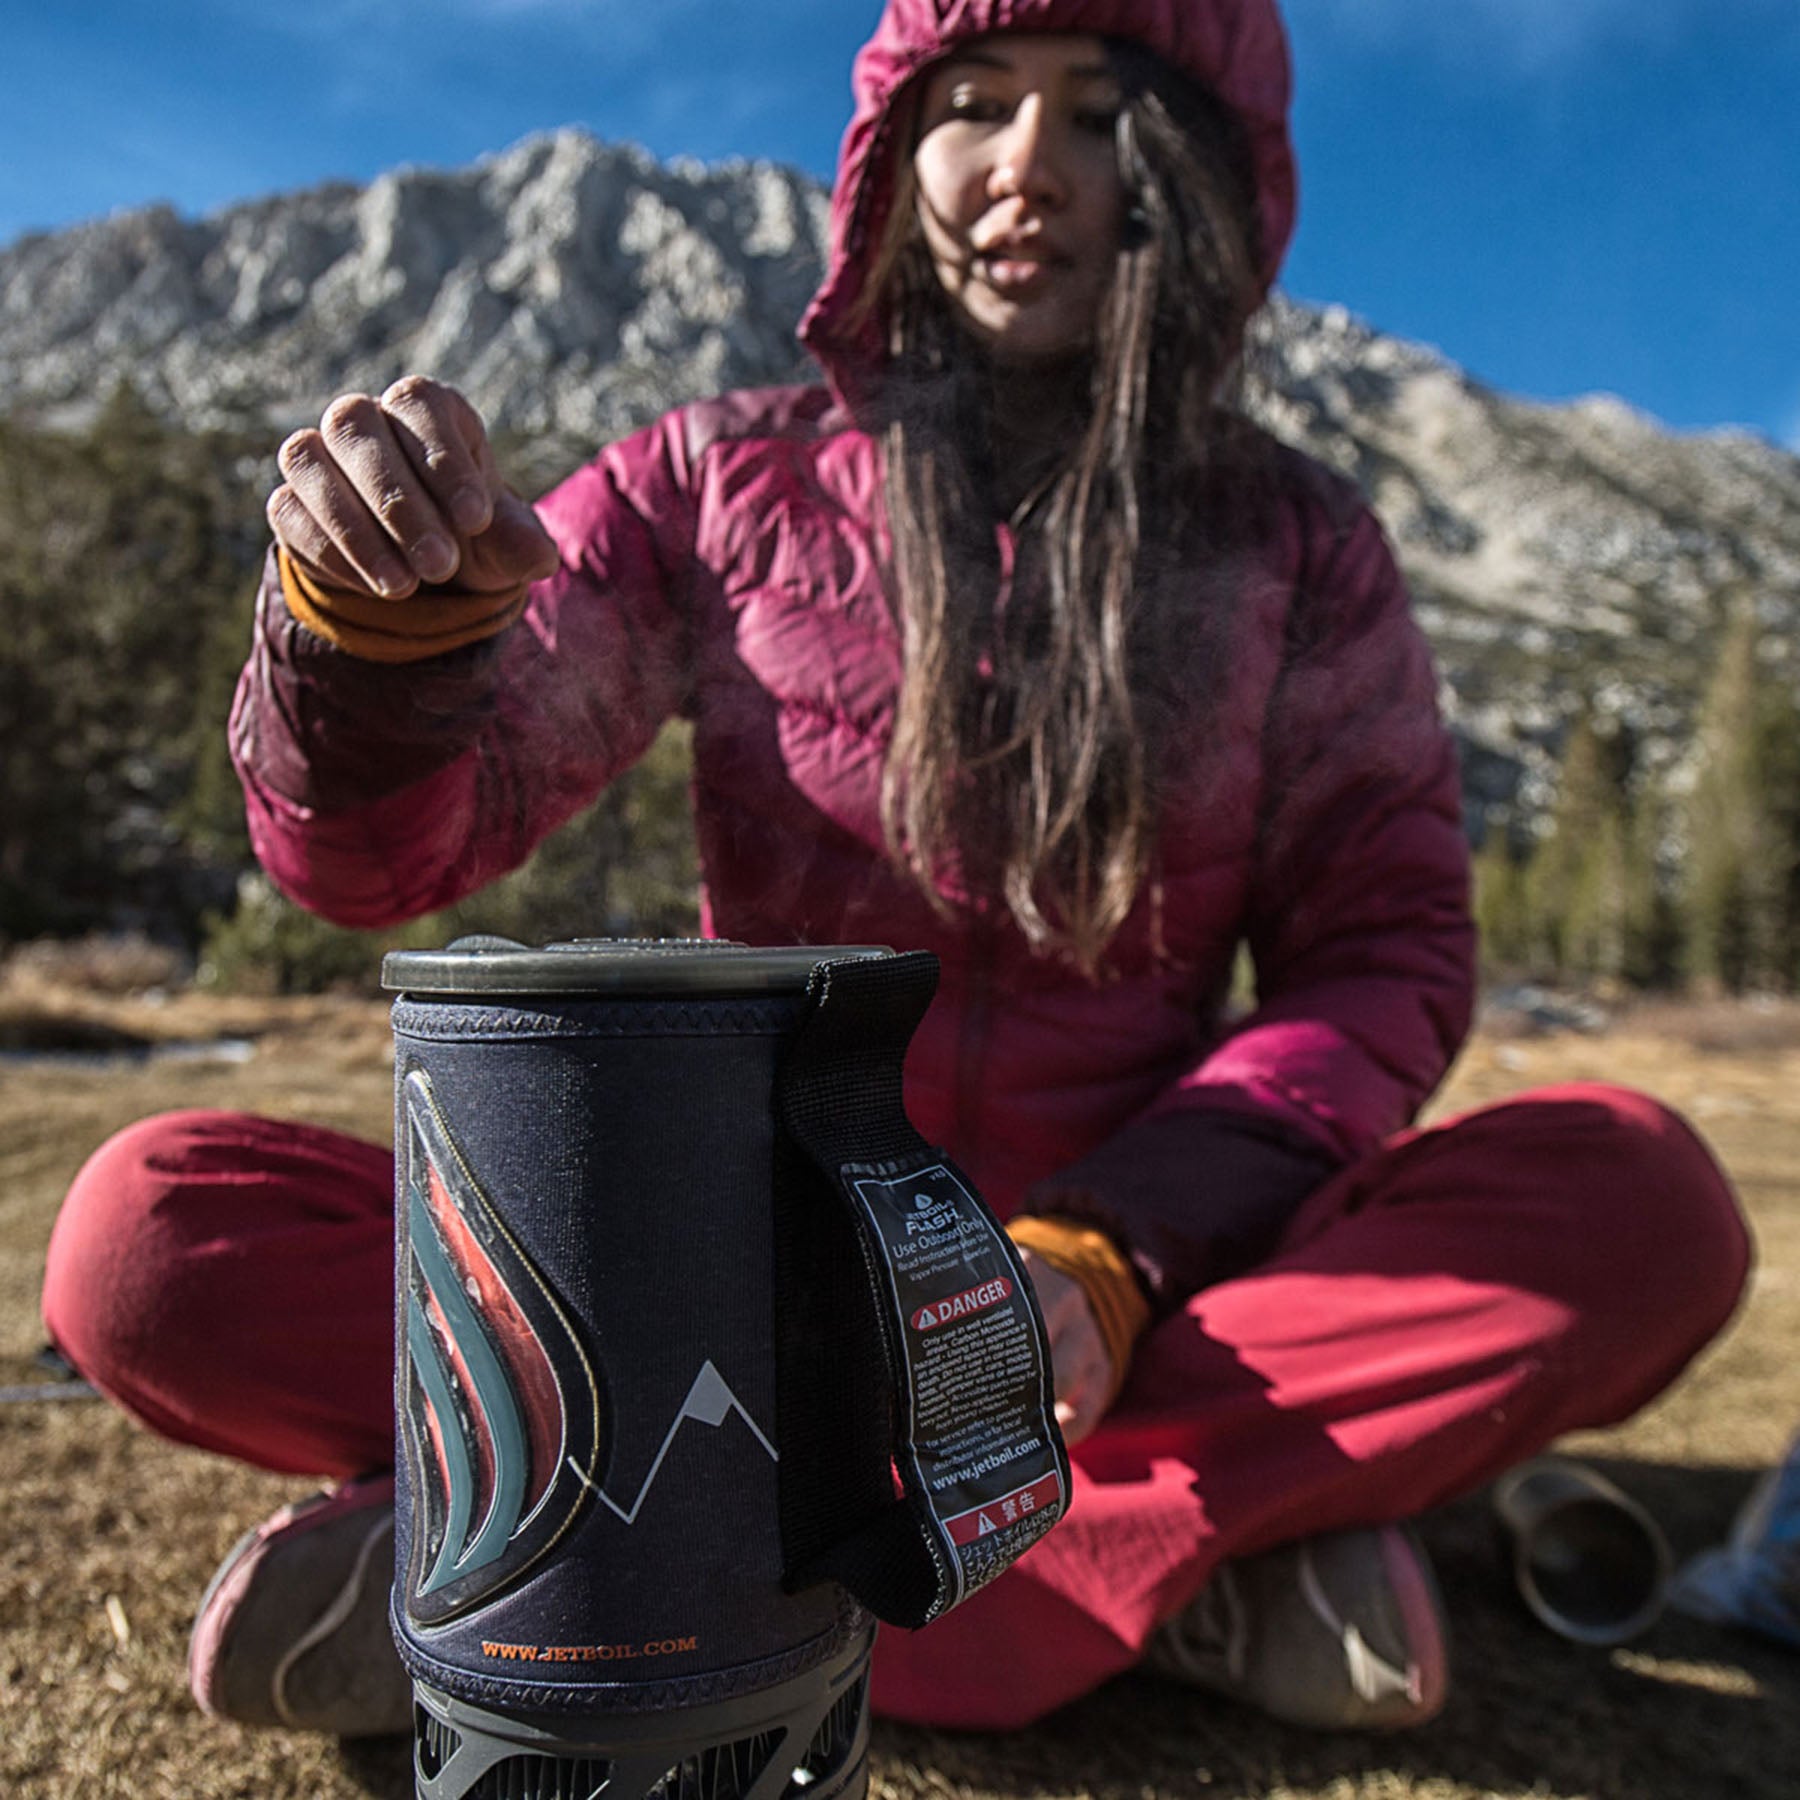 a women prepares to take the lid off a jet boil flash stove